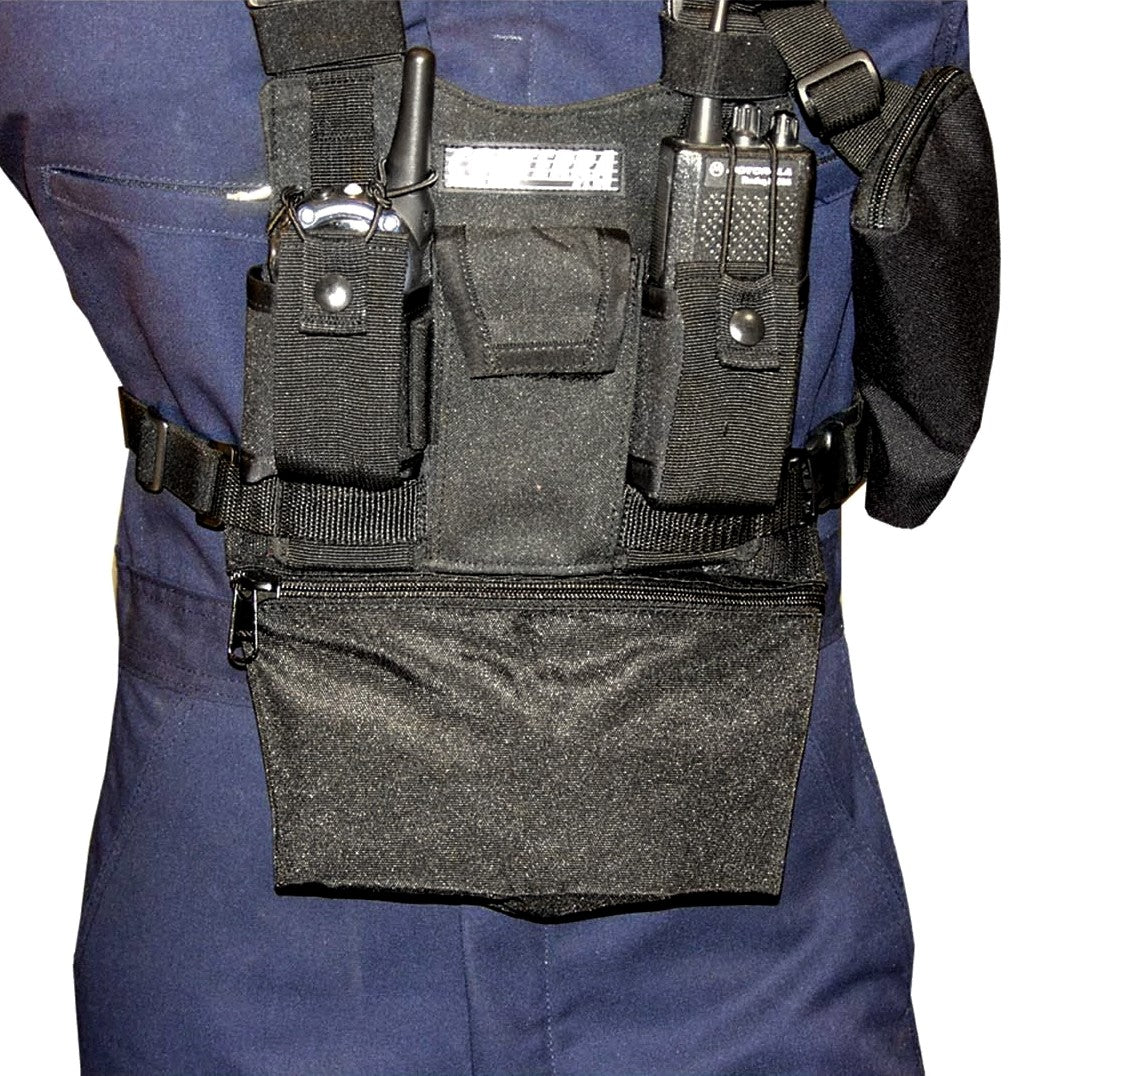 The Conterra Roo Pouch, attached to the Double Adjusta Pro Chest Harness